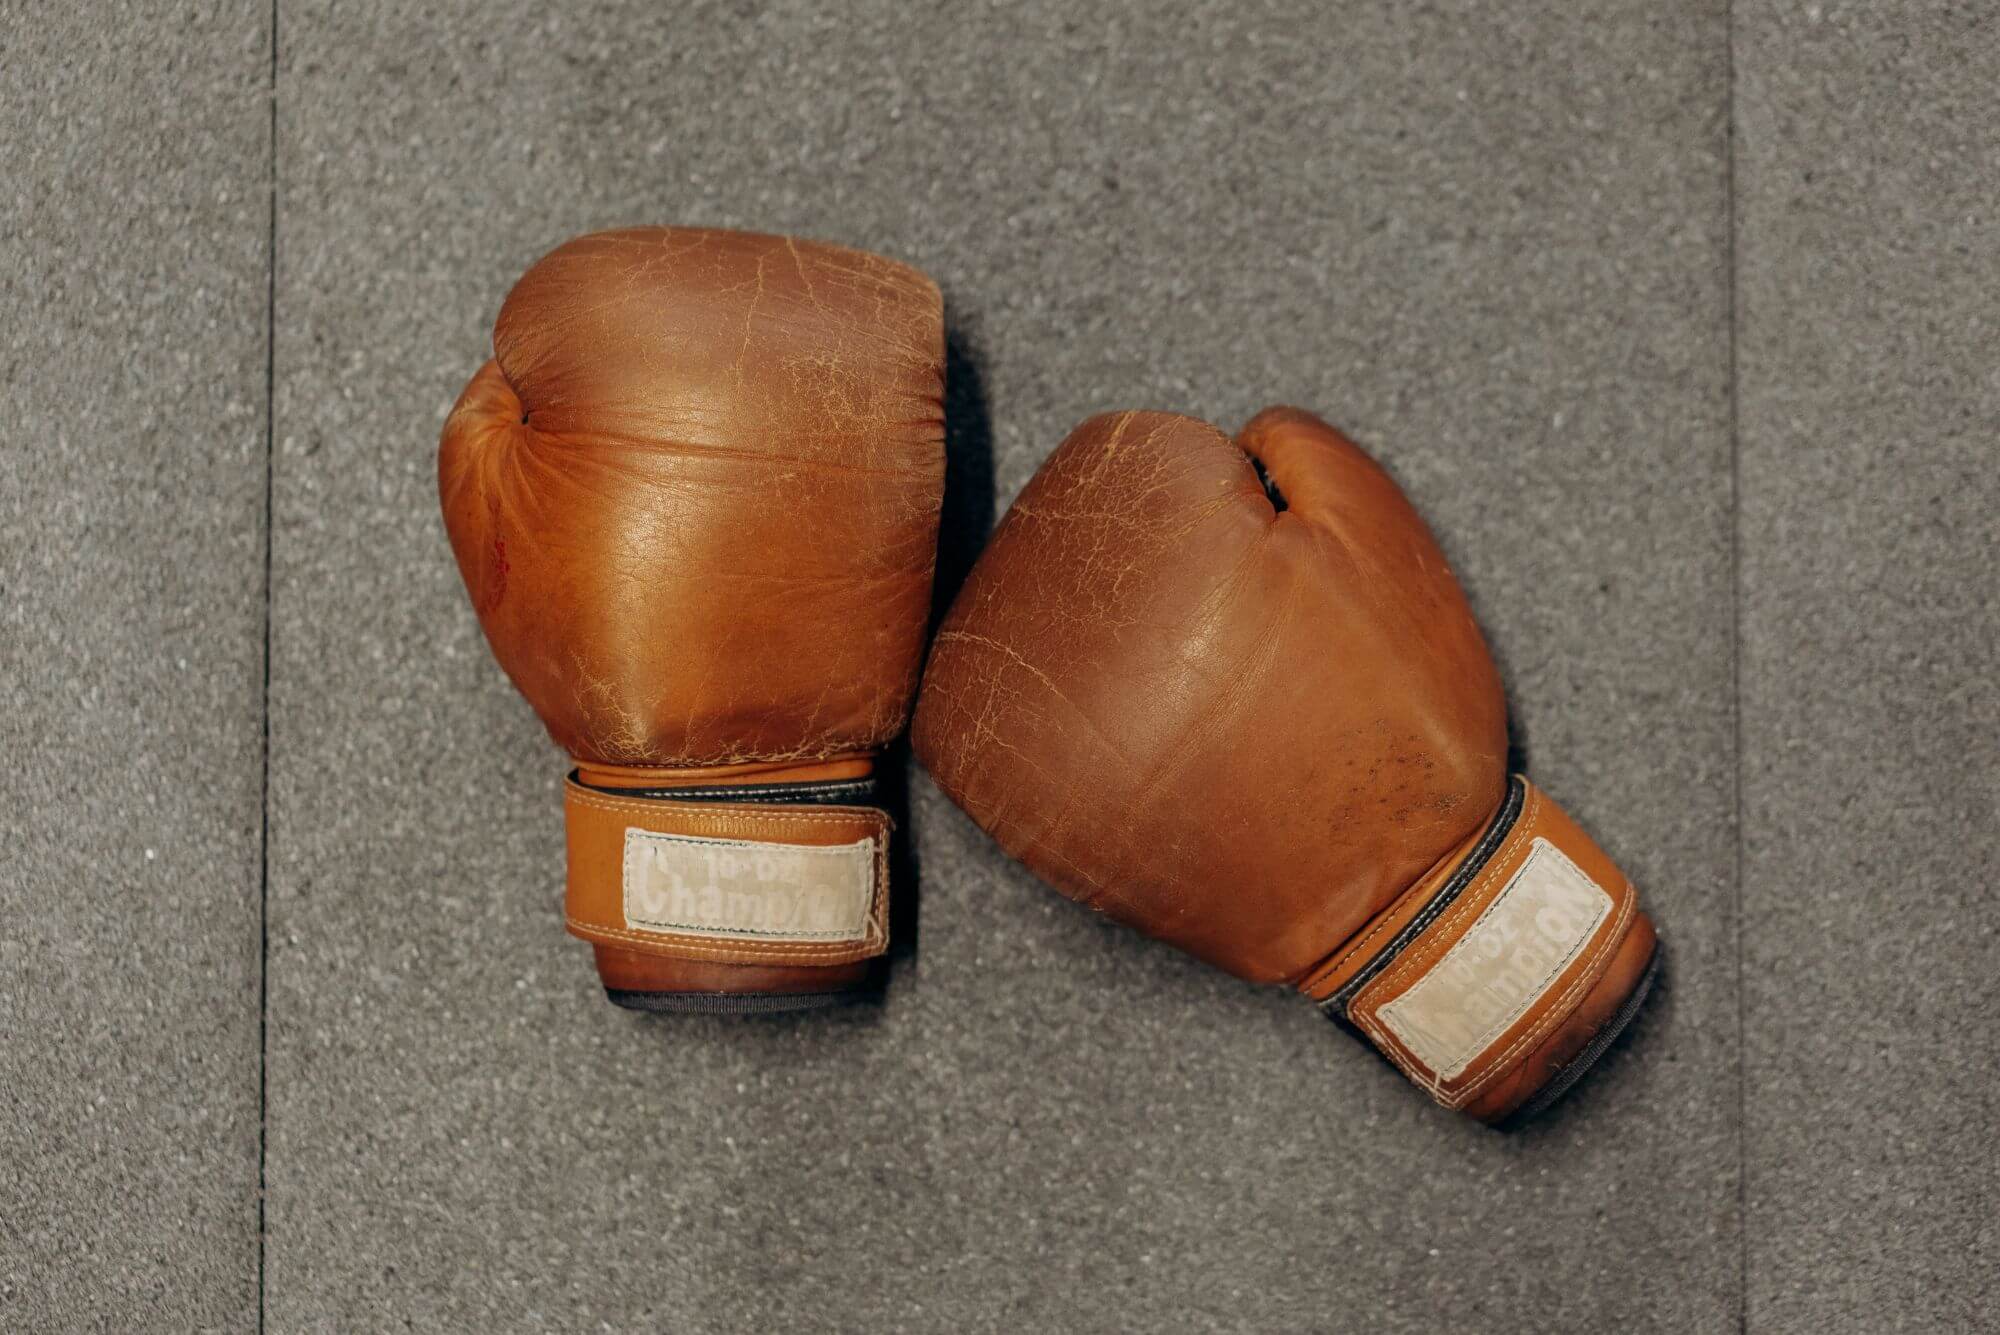 A pair of brown leather boxing gloves on gray surface